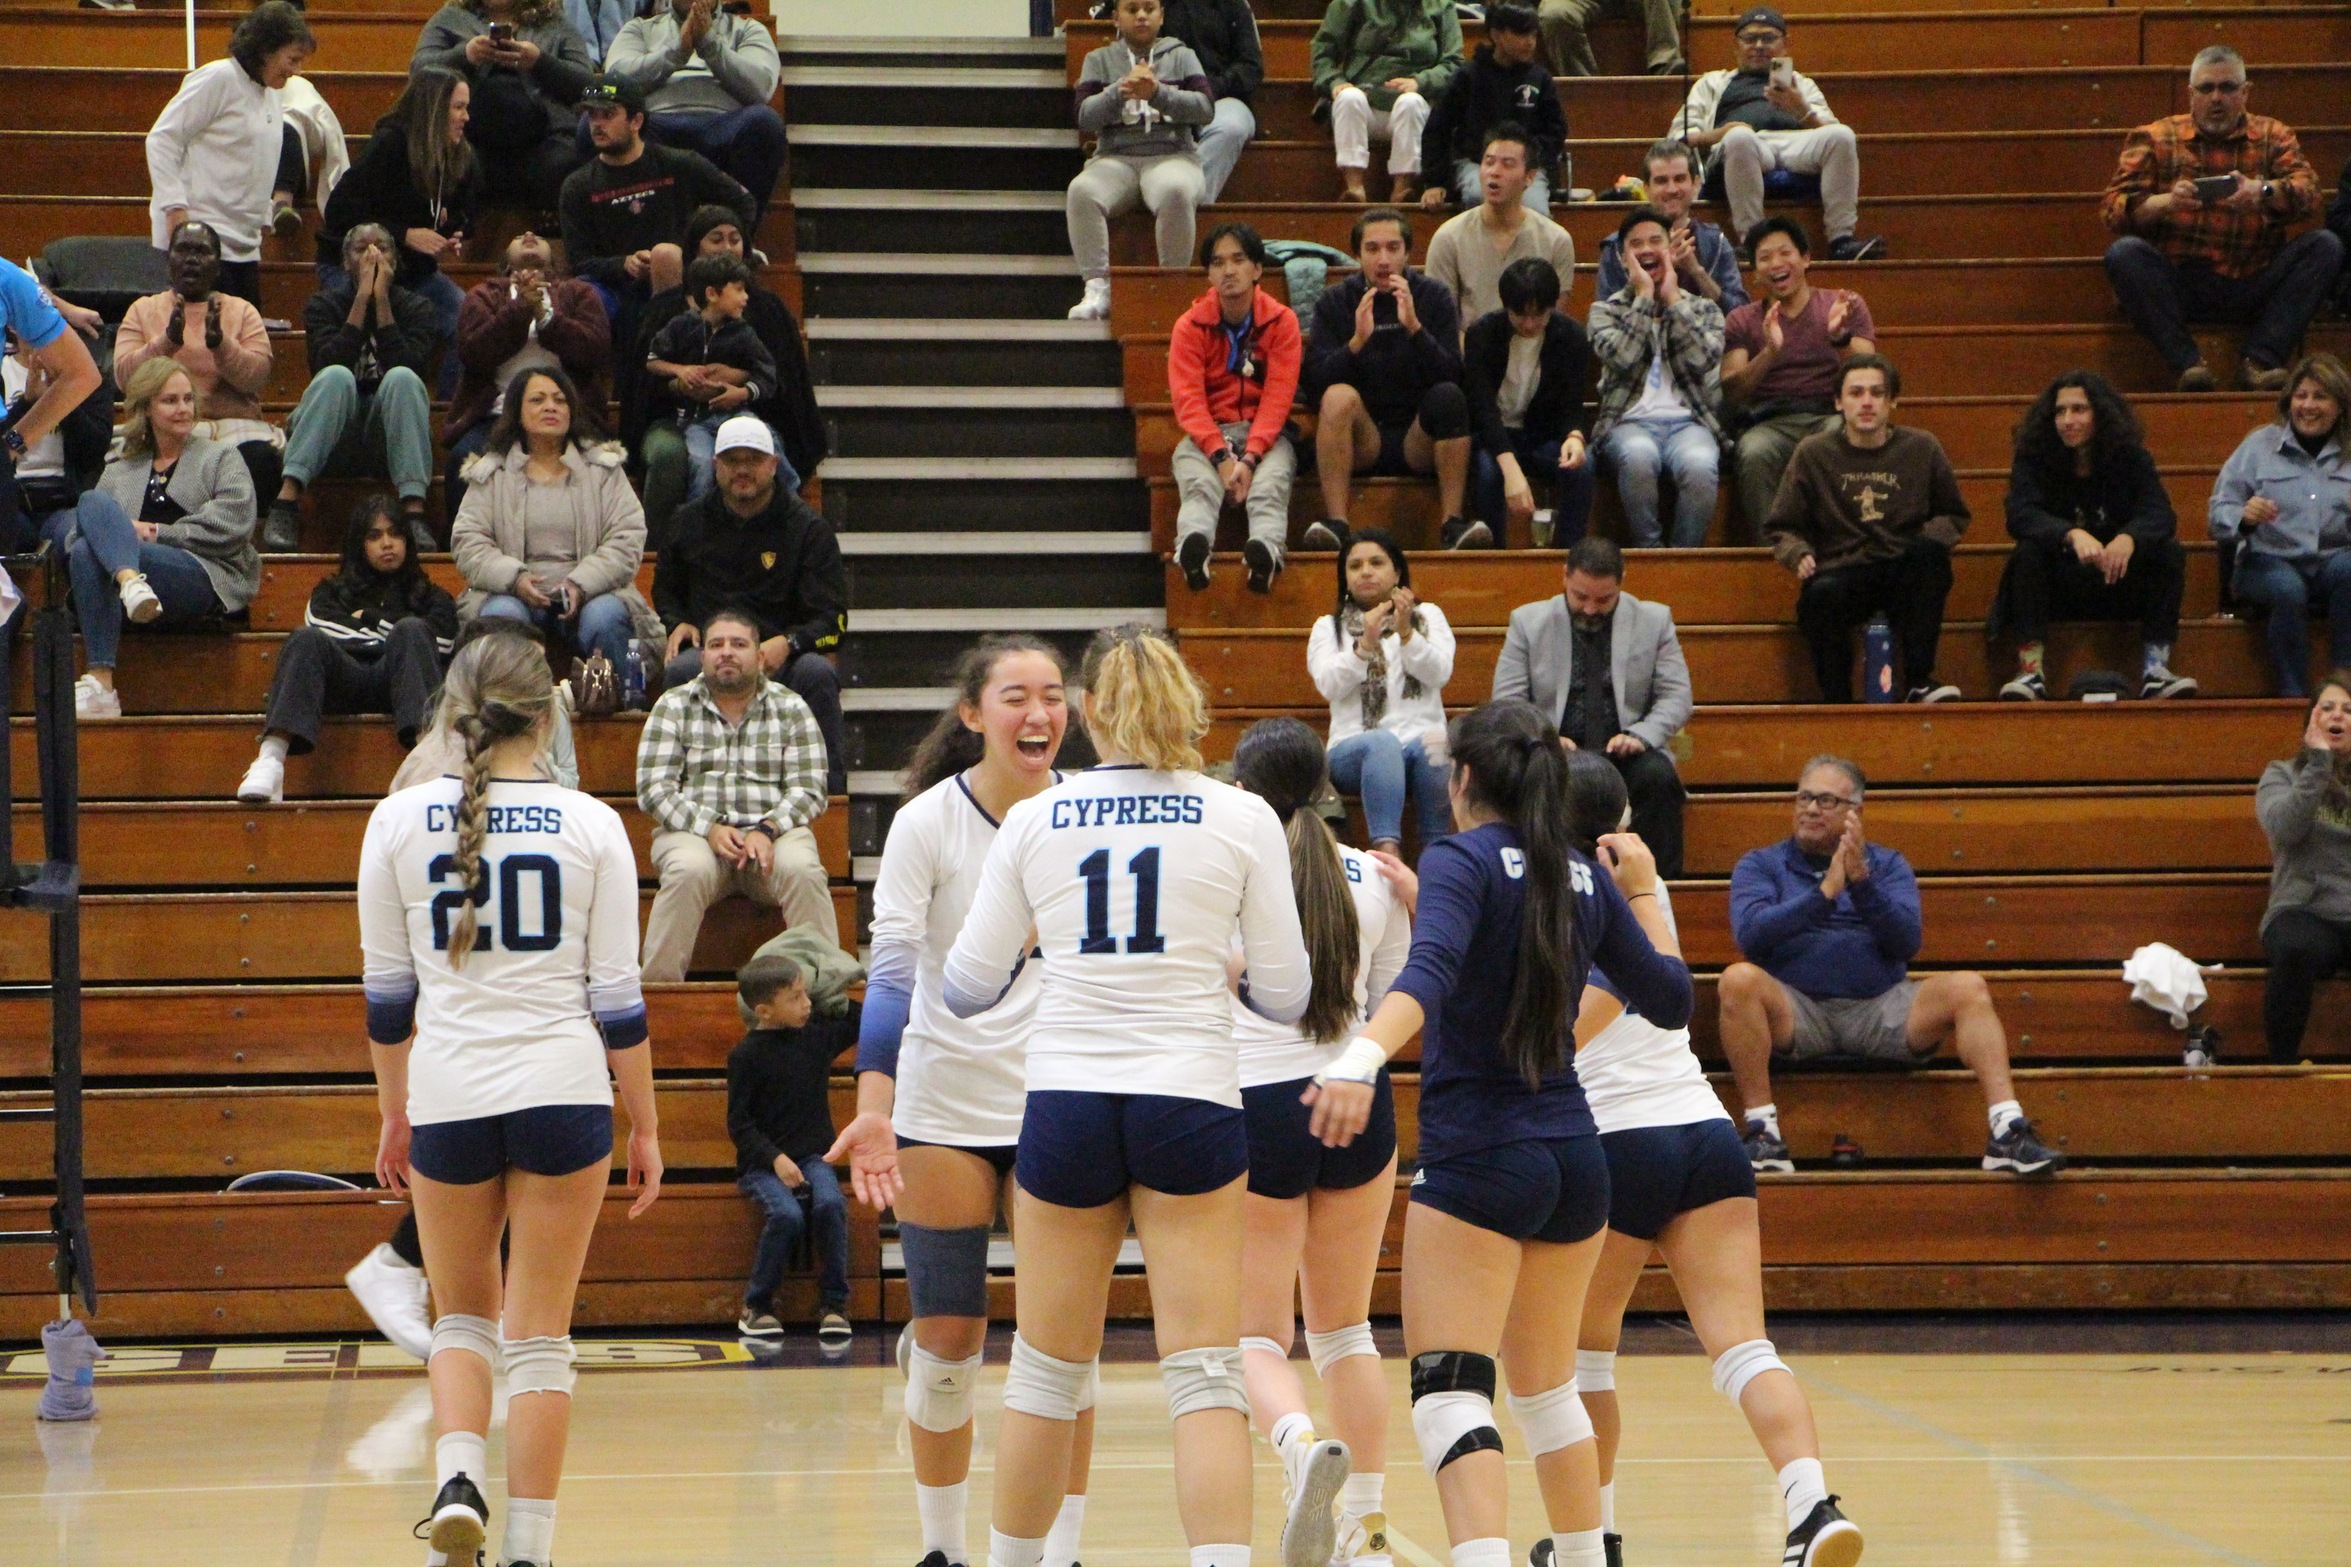 The Chargers Take Down the Pirates in Five Sets, 3-2